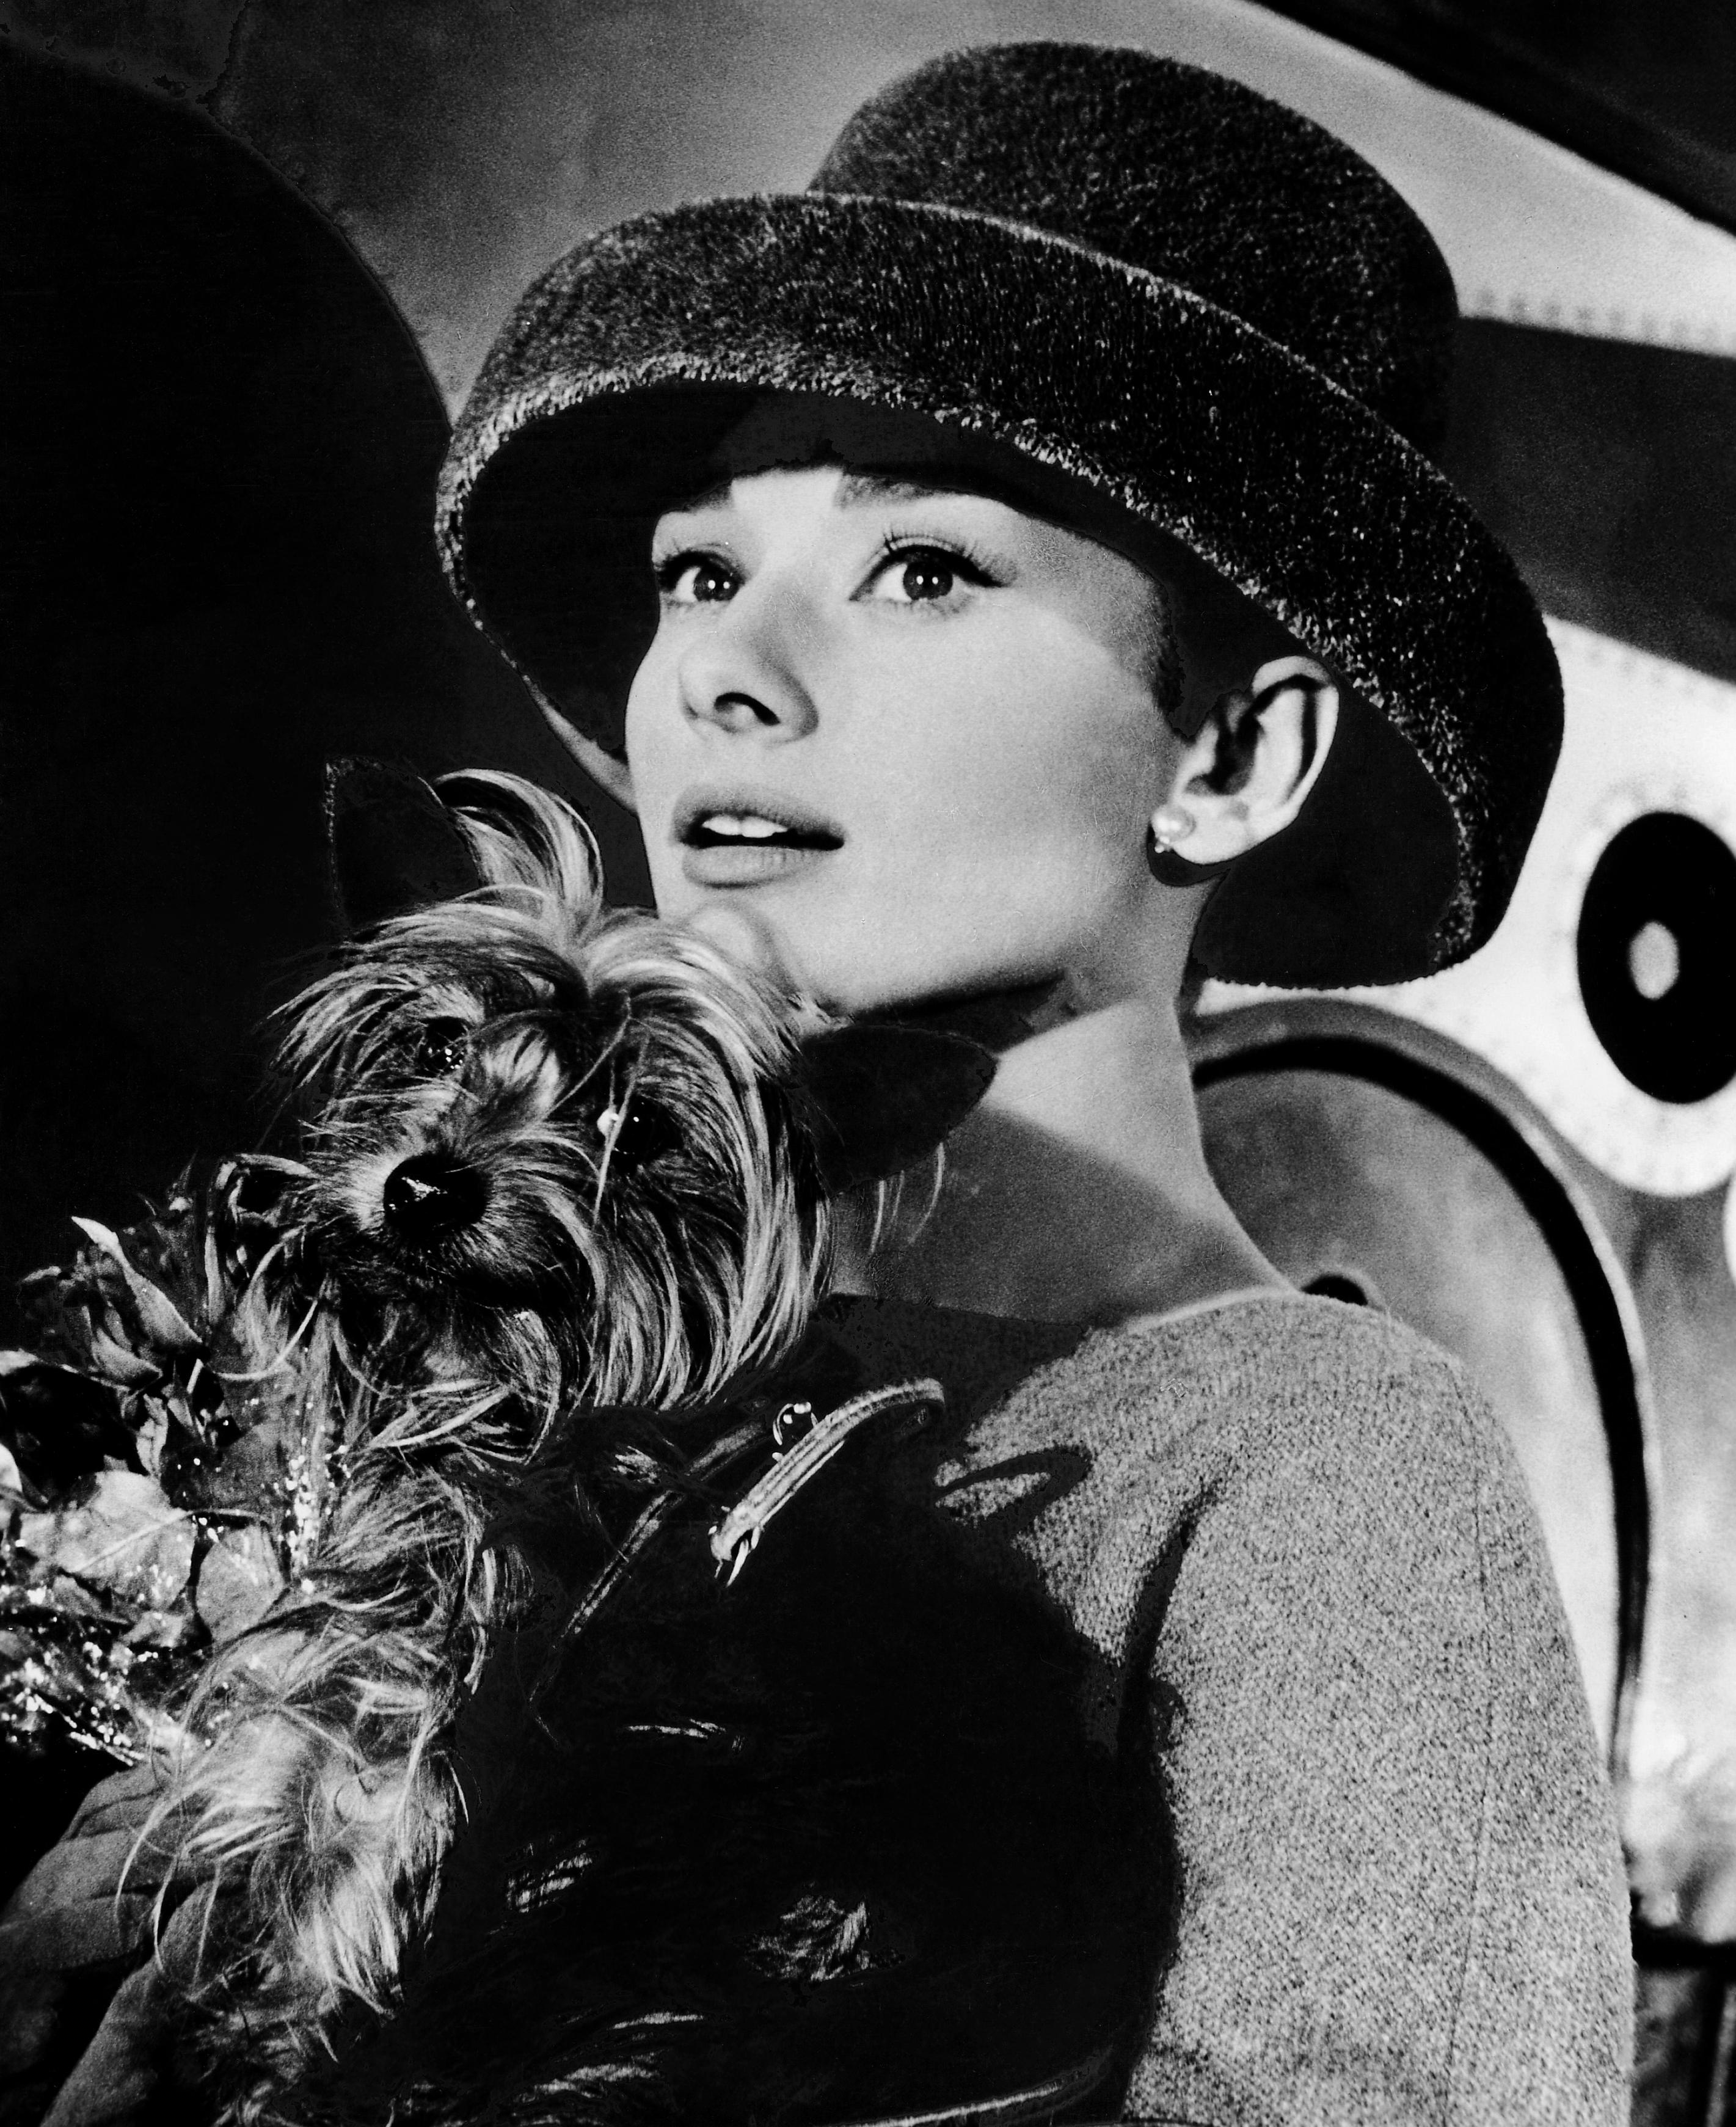 Unknown Portrait Photograph - Audrey Hepburn with Dog in "Funny Face" Globe Photos Fine Art Print